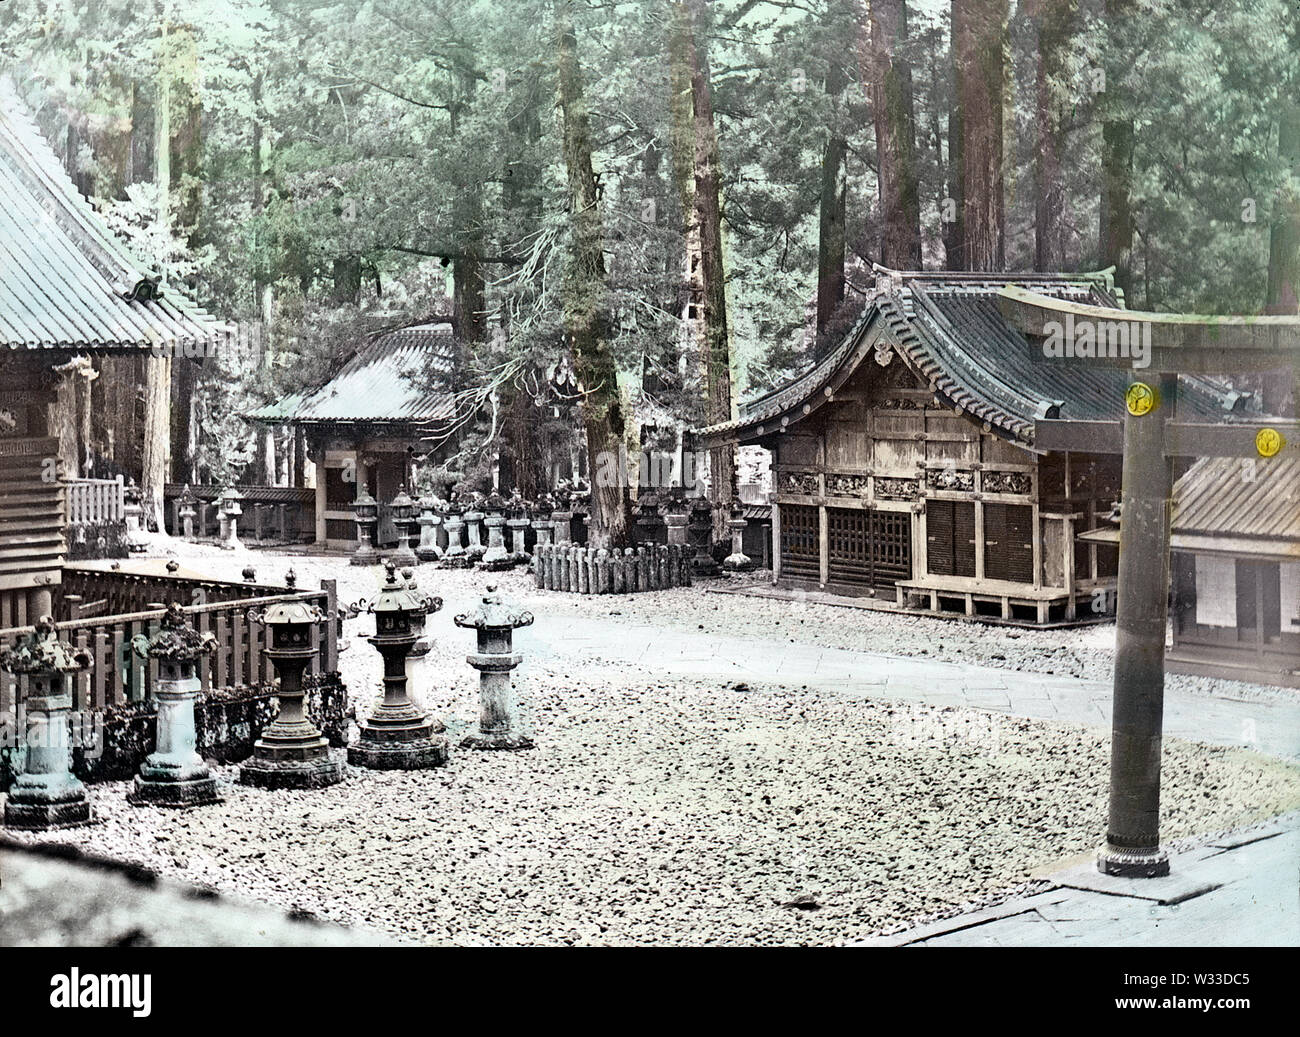 [ 1890s Japan - Sacred Shrines at Nikko ] —   The 6 meter high Karado Torii, the first bronze torii in Japan, as seen from the Yomeimon in Nikko. The building in the center is Shinkyu, the stable for sacred horses and the only building of plain wood in Toshogu Shrine. The entrance gate on the left is Niomon.  19th century vintage glass slide. Stock Photo